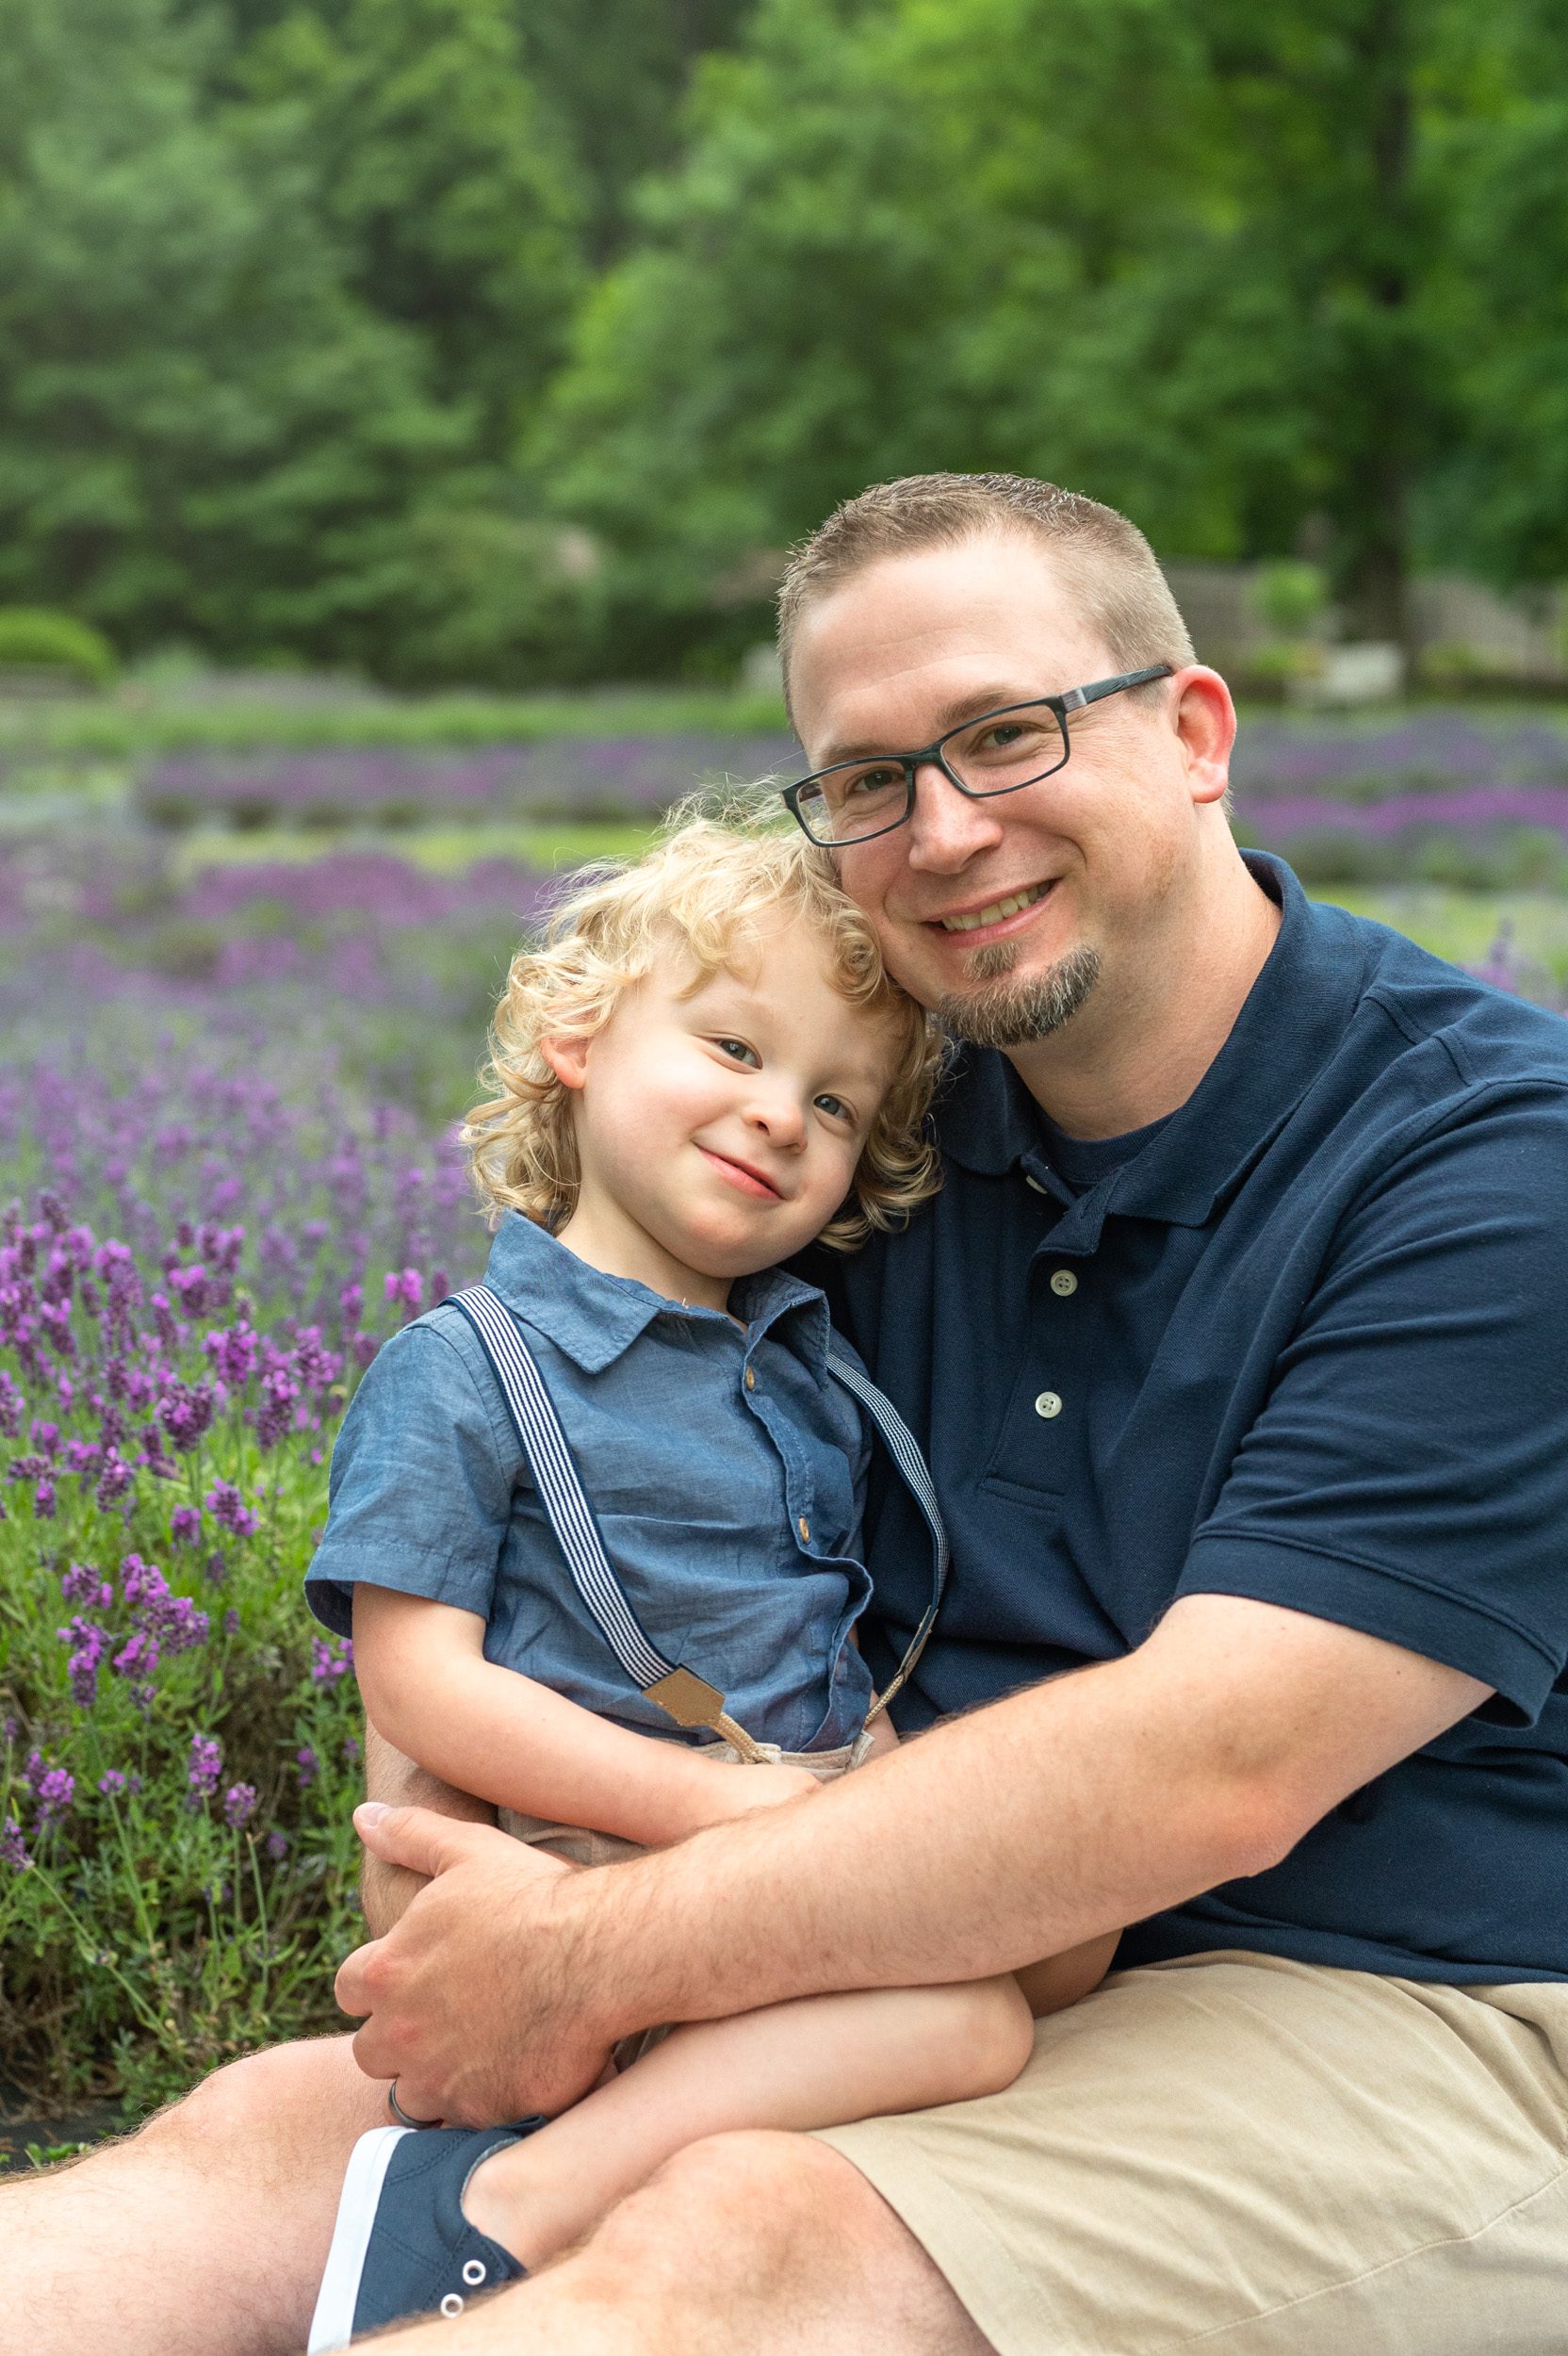 a little boy sitting on his dad's lap and smiling at the camera in a field of purple lavender 